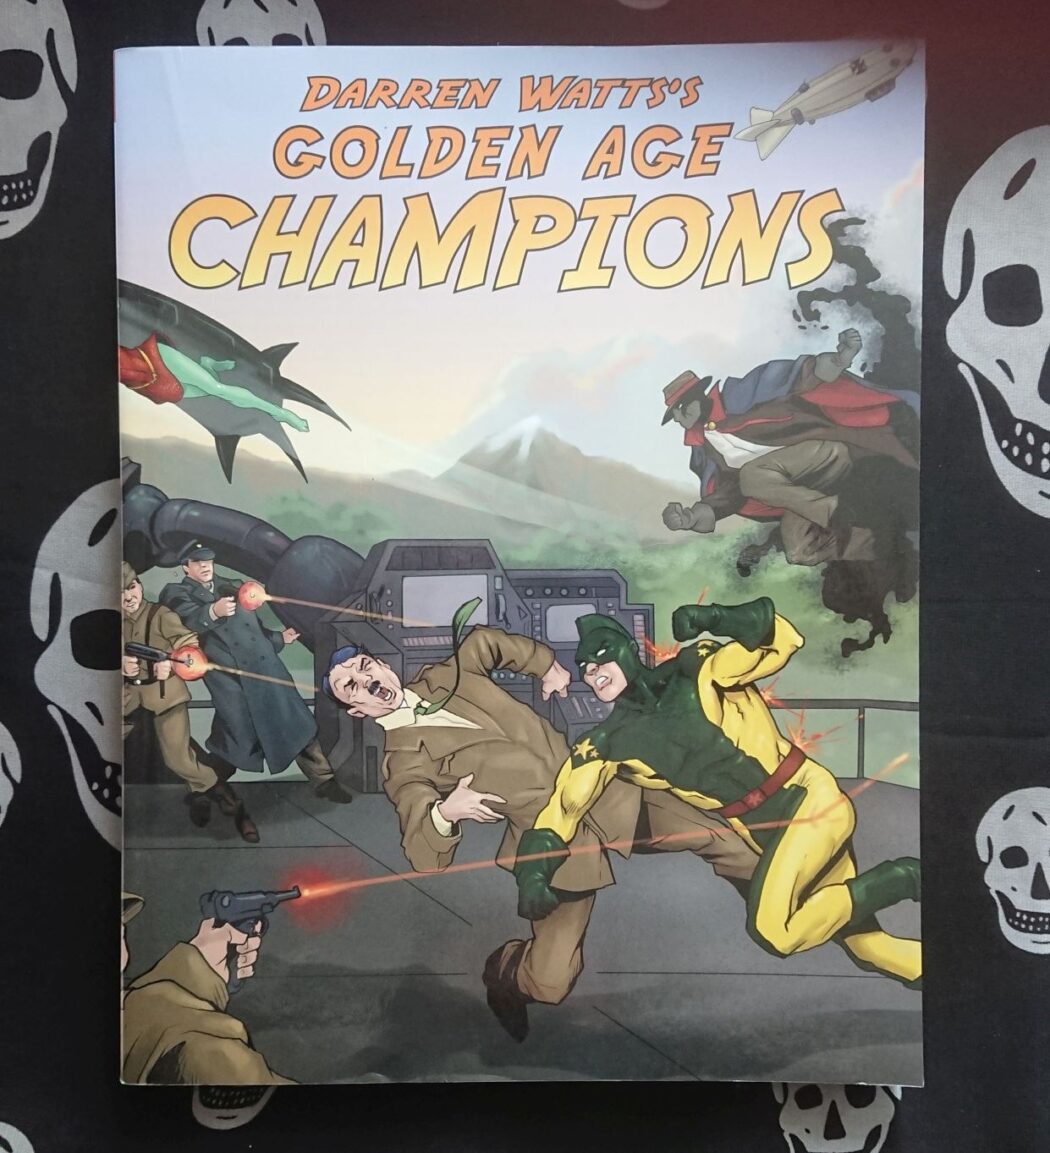 Golden Age Champions cover